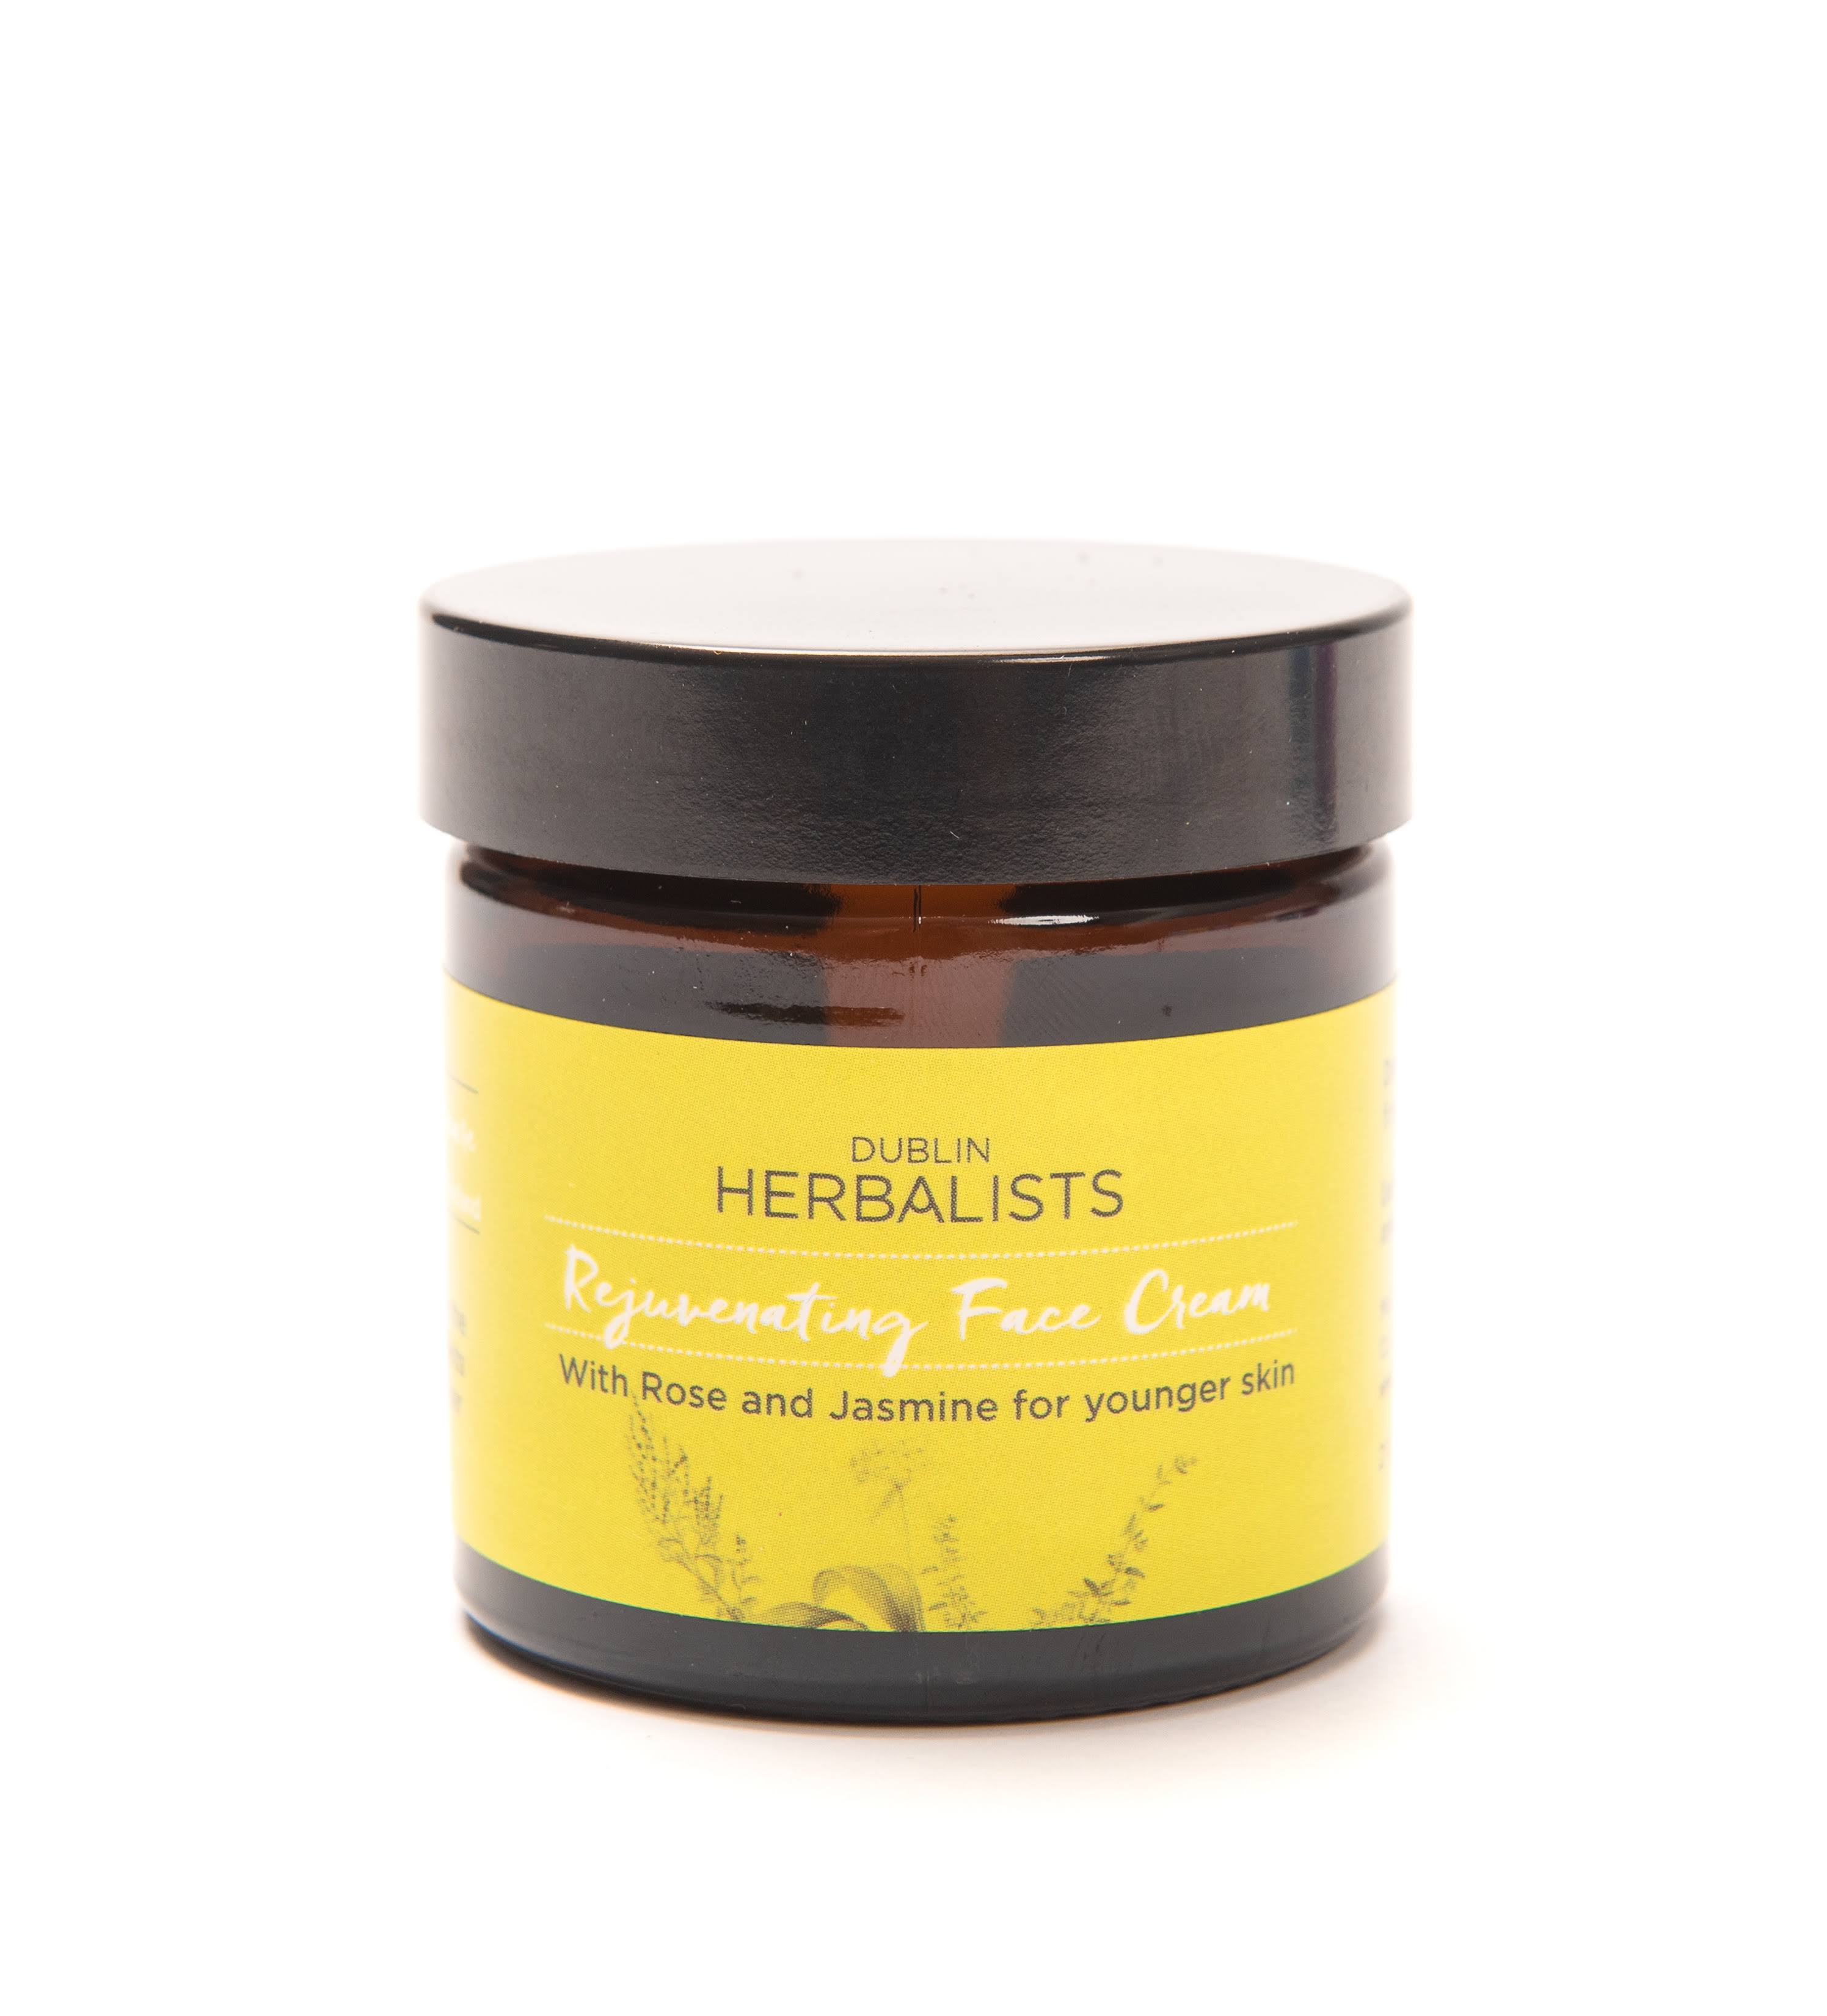 Dublin Herbalists Rejuvenating Face Cream with Rose and Jasmine Extracts